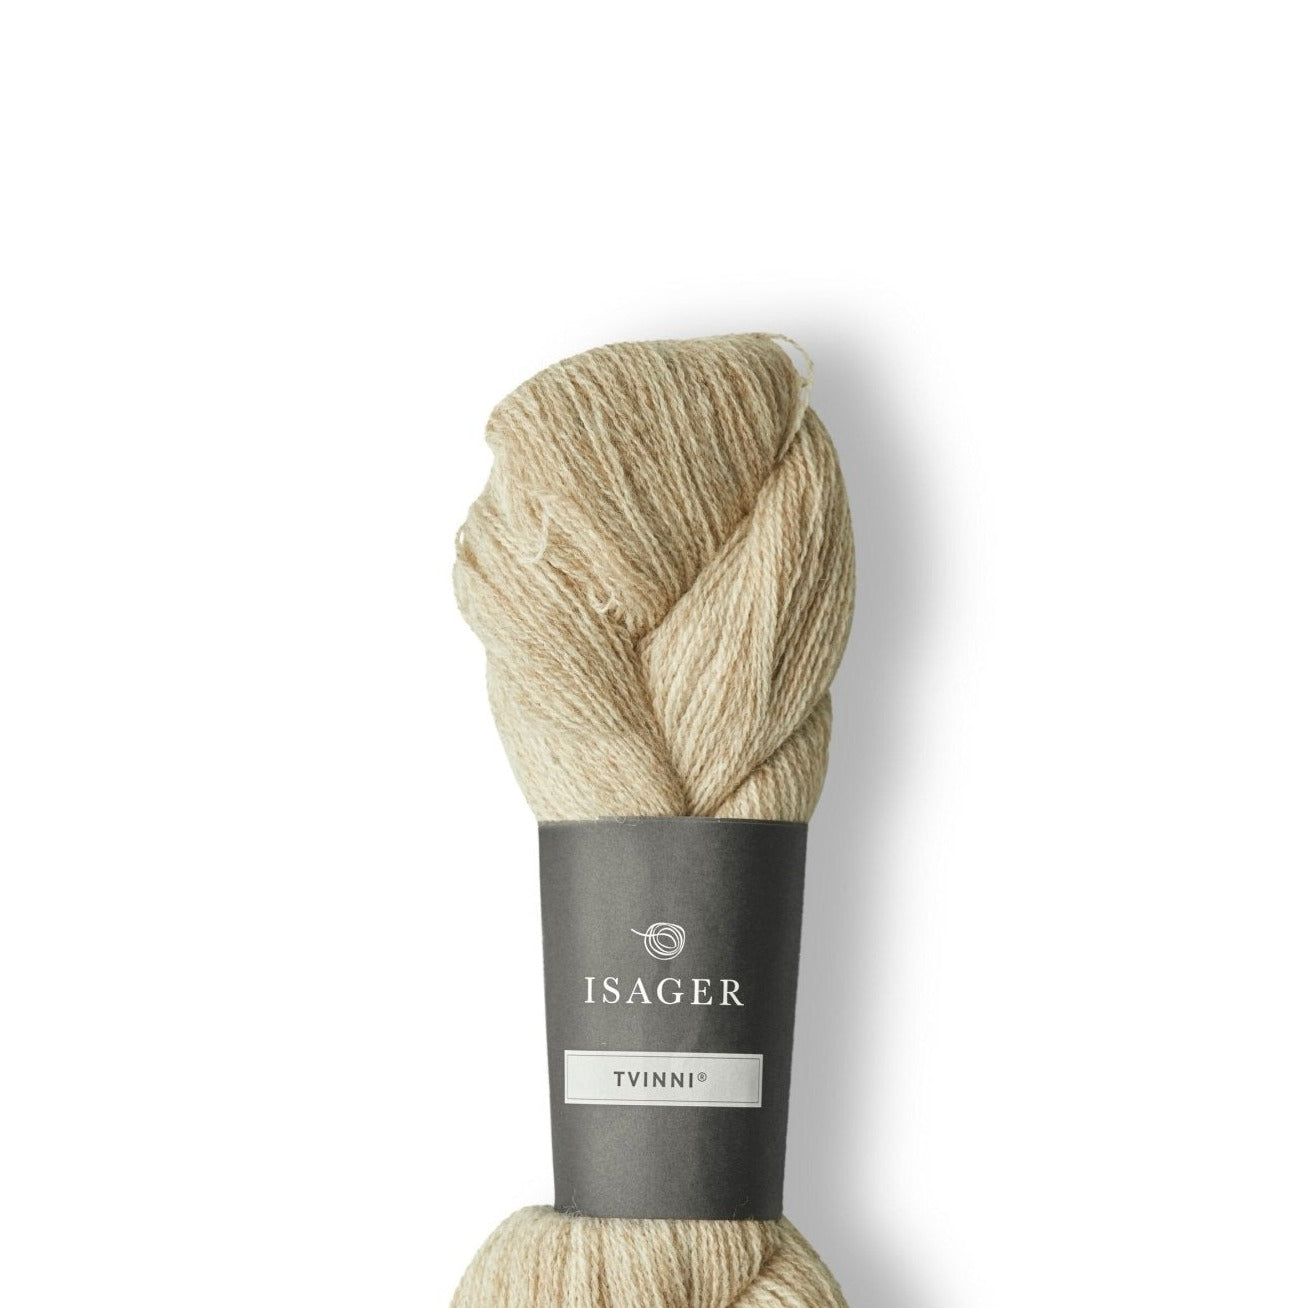 Isager Tvinni - 6s - 4 Ply - Isager - The Little Yarn Store